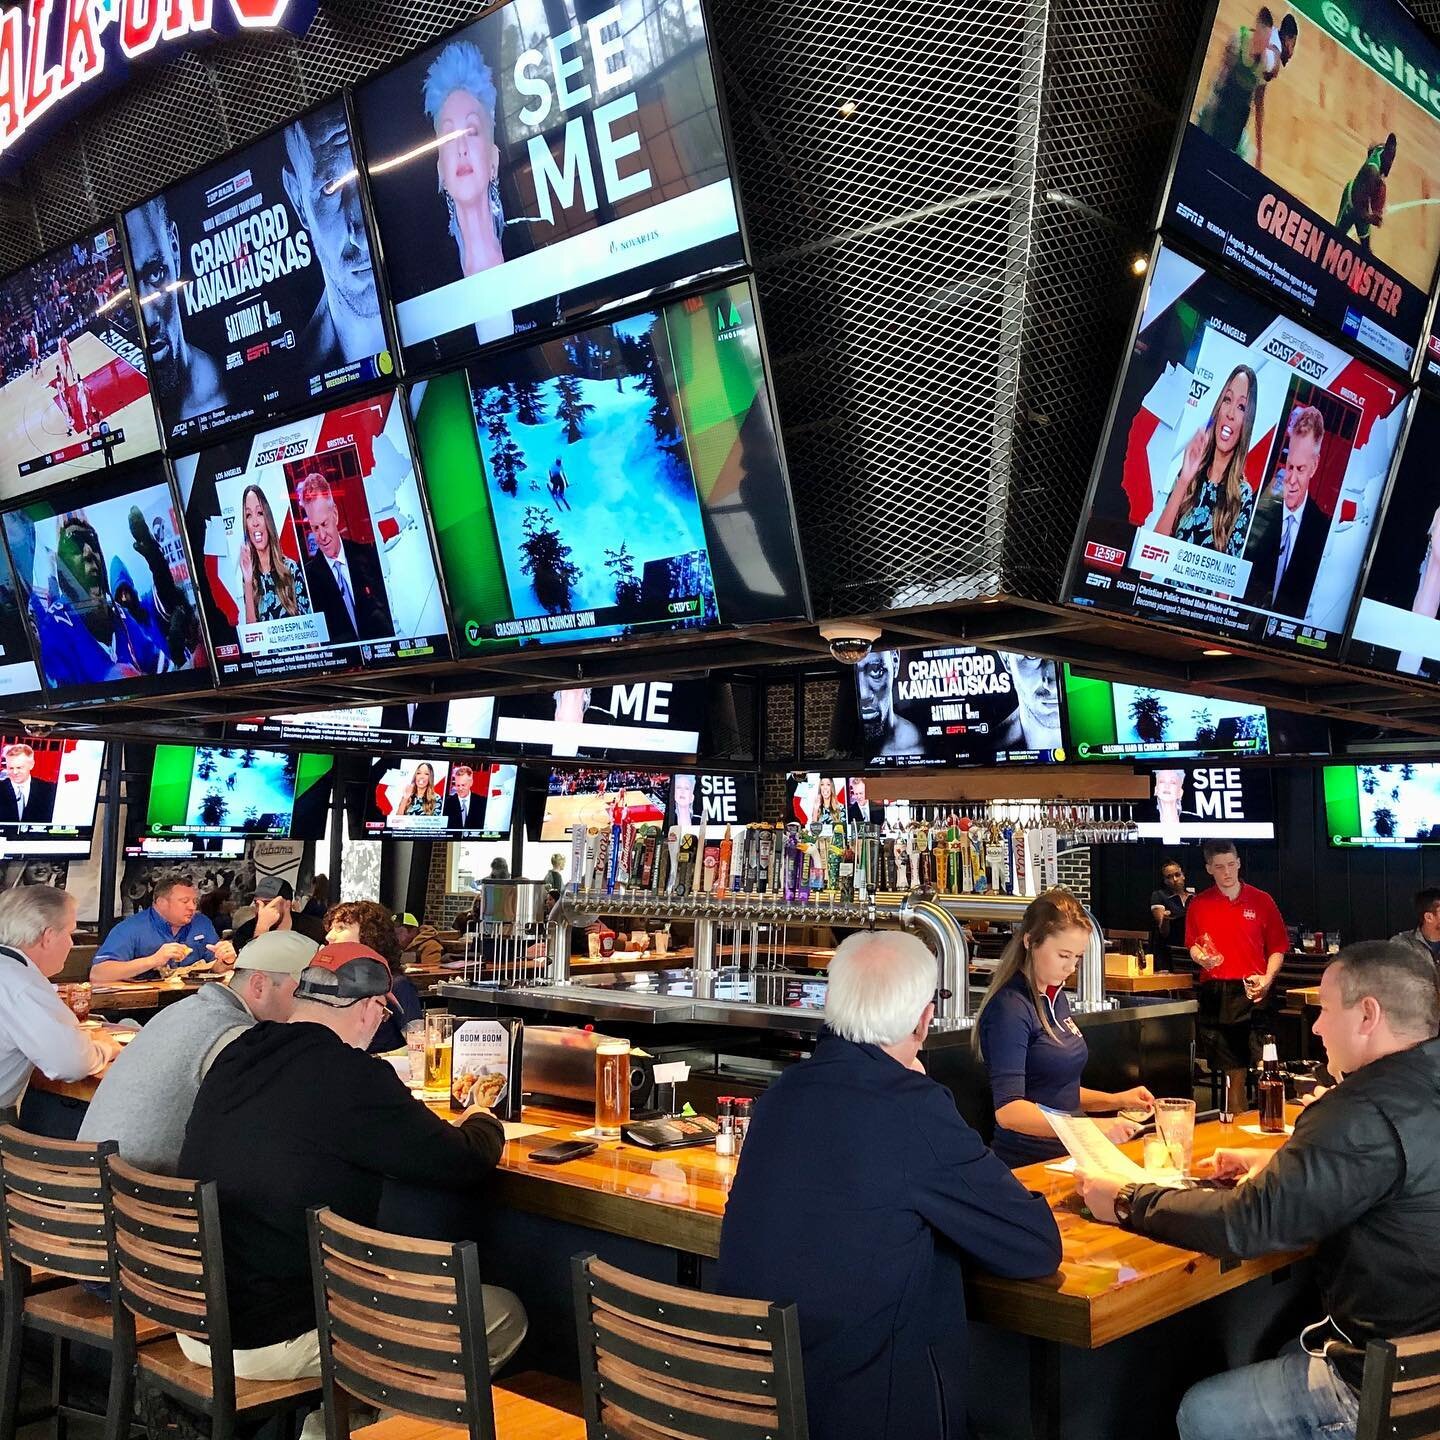 Walk-On&rsquo;s is open and hopping! This is not your typical sports bar. The food is outstanding! Check it out! @walkons